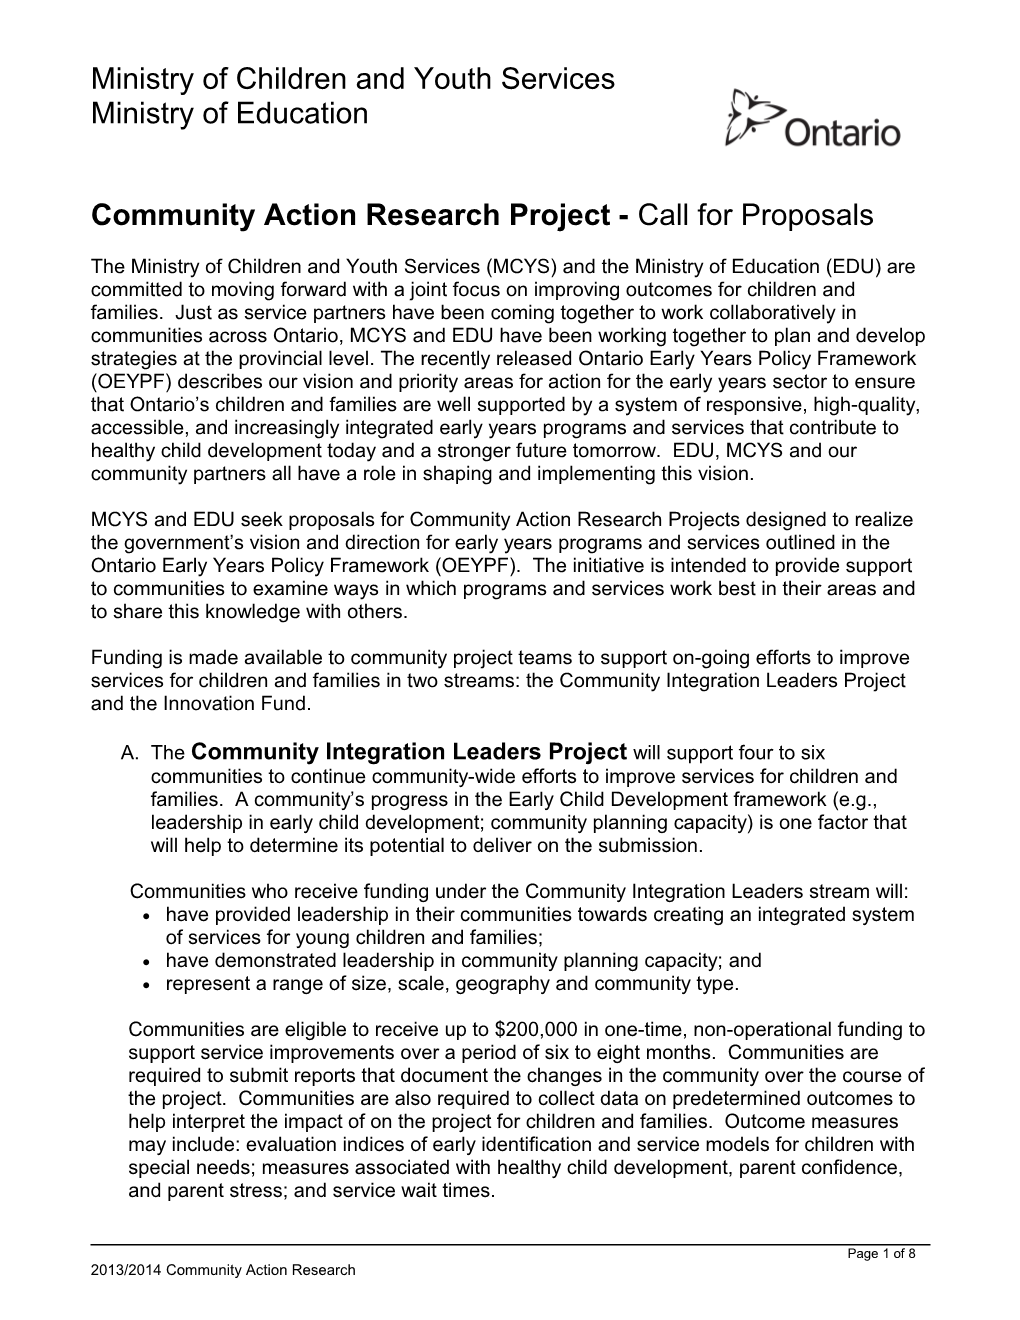 Community Action Research Project - Call for Proposals